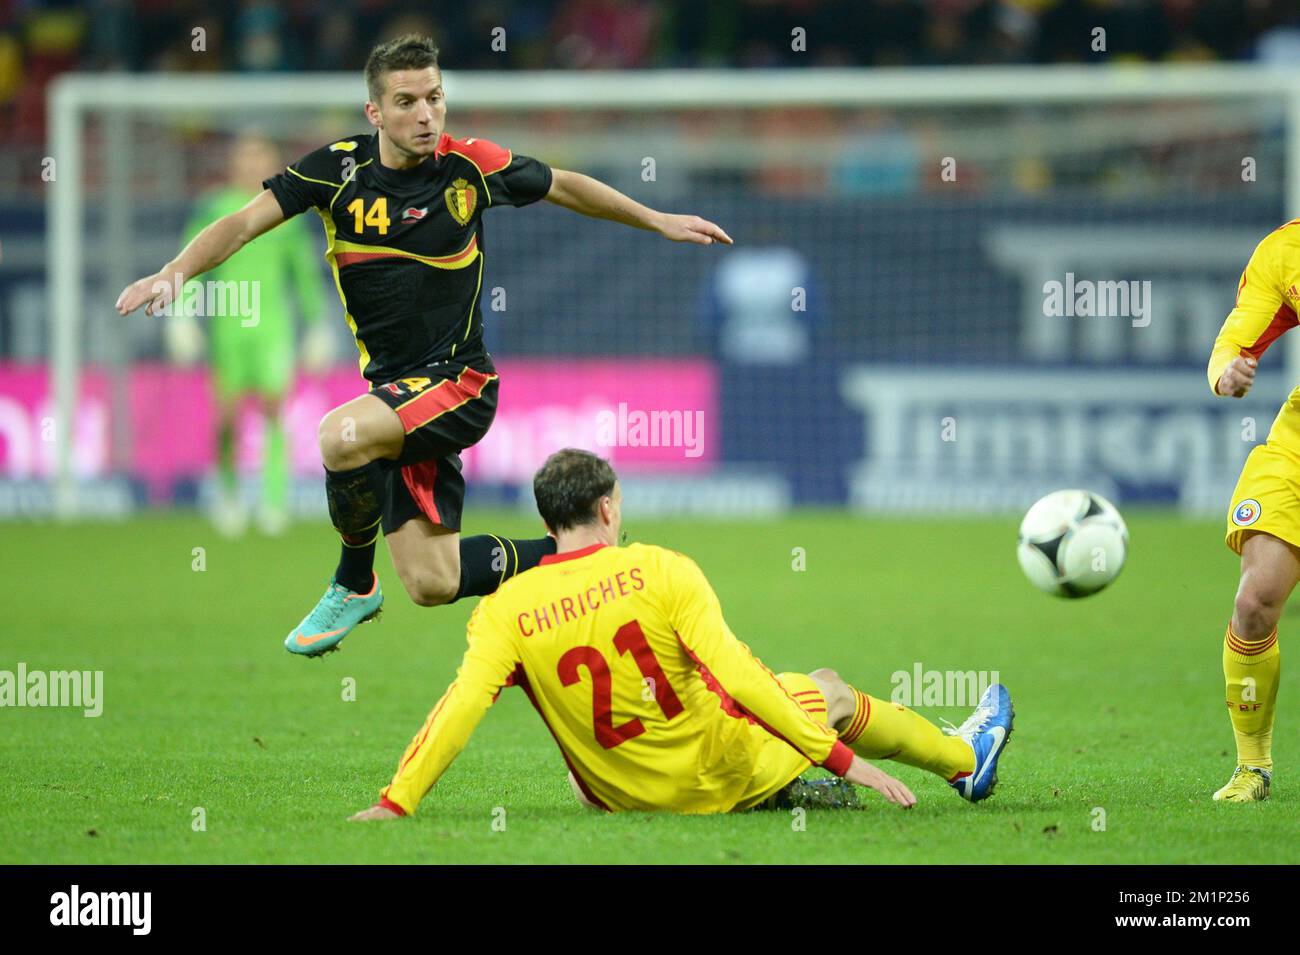 20121114 - BUCAREST, ROMANIA: Belgium's Dries Mertens and Romania's Vlad Chiriches fight for the ball during a friendly soccer game between Romania and the Belgian national team 'the Red Devils' in Bucharest, Romania, Wednesday 14 November 2012. BELGA PHOTO YORICK JANSENS Stock Photo